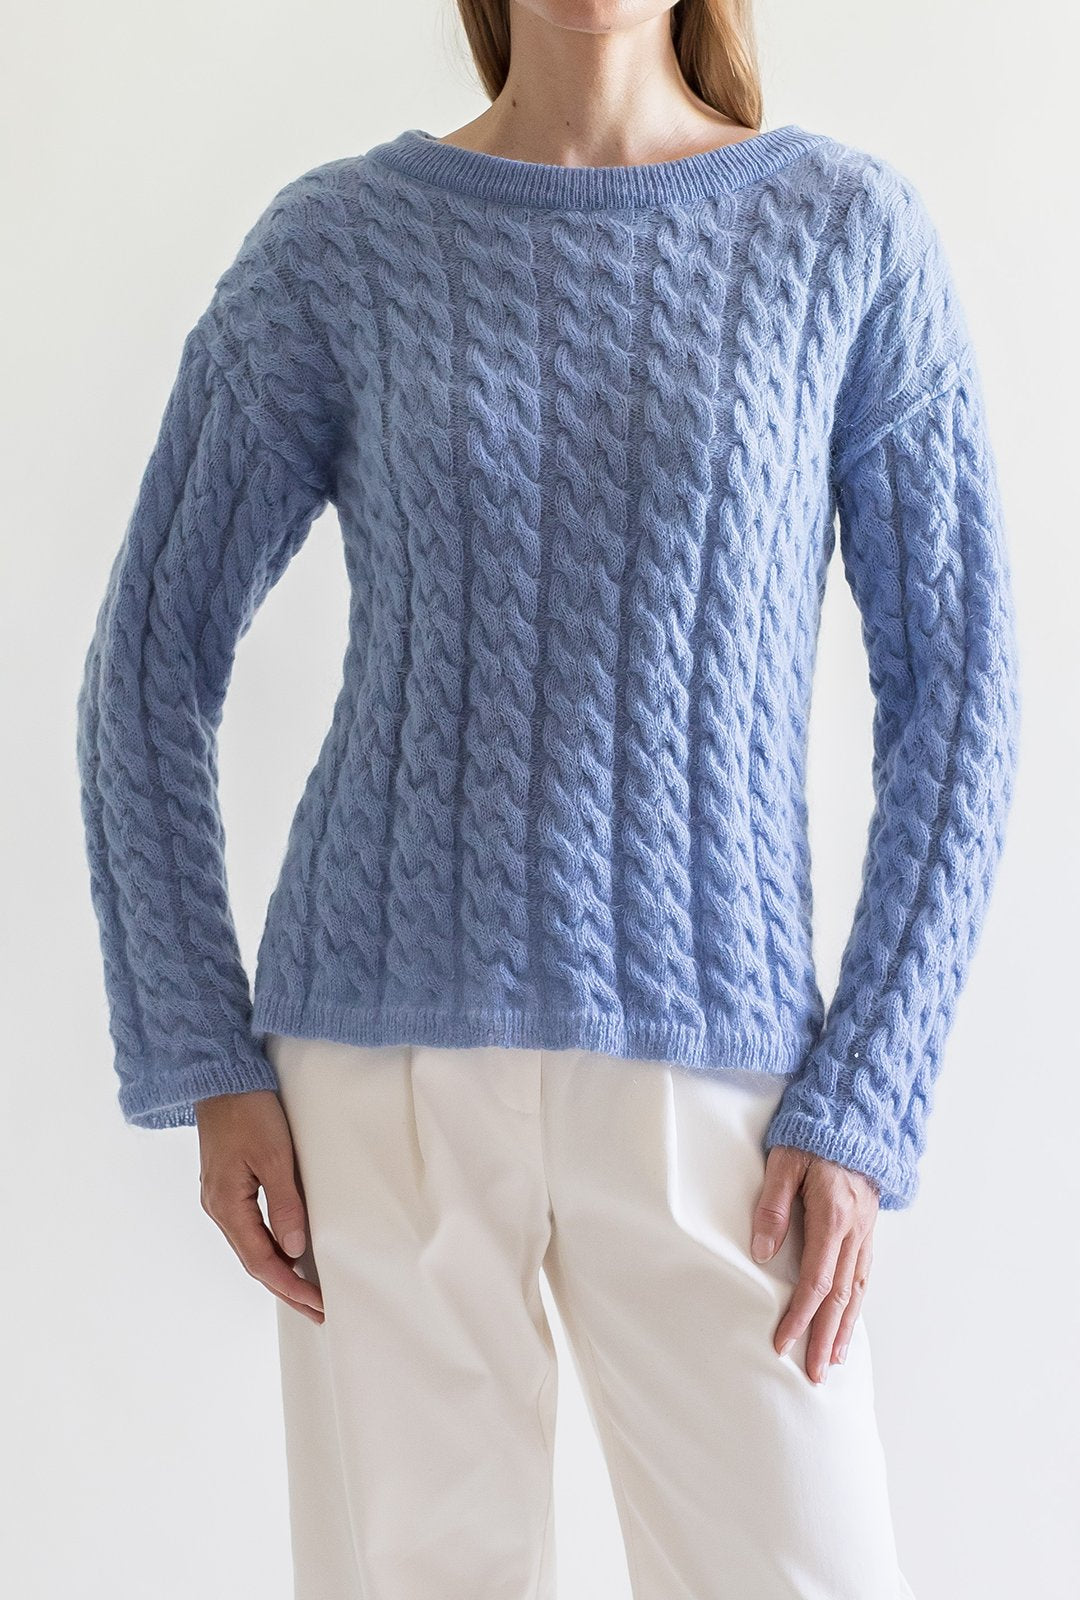 MOHAIR CABLE KNIT LIGHT BLUE